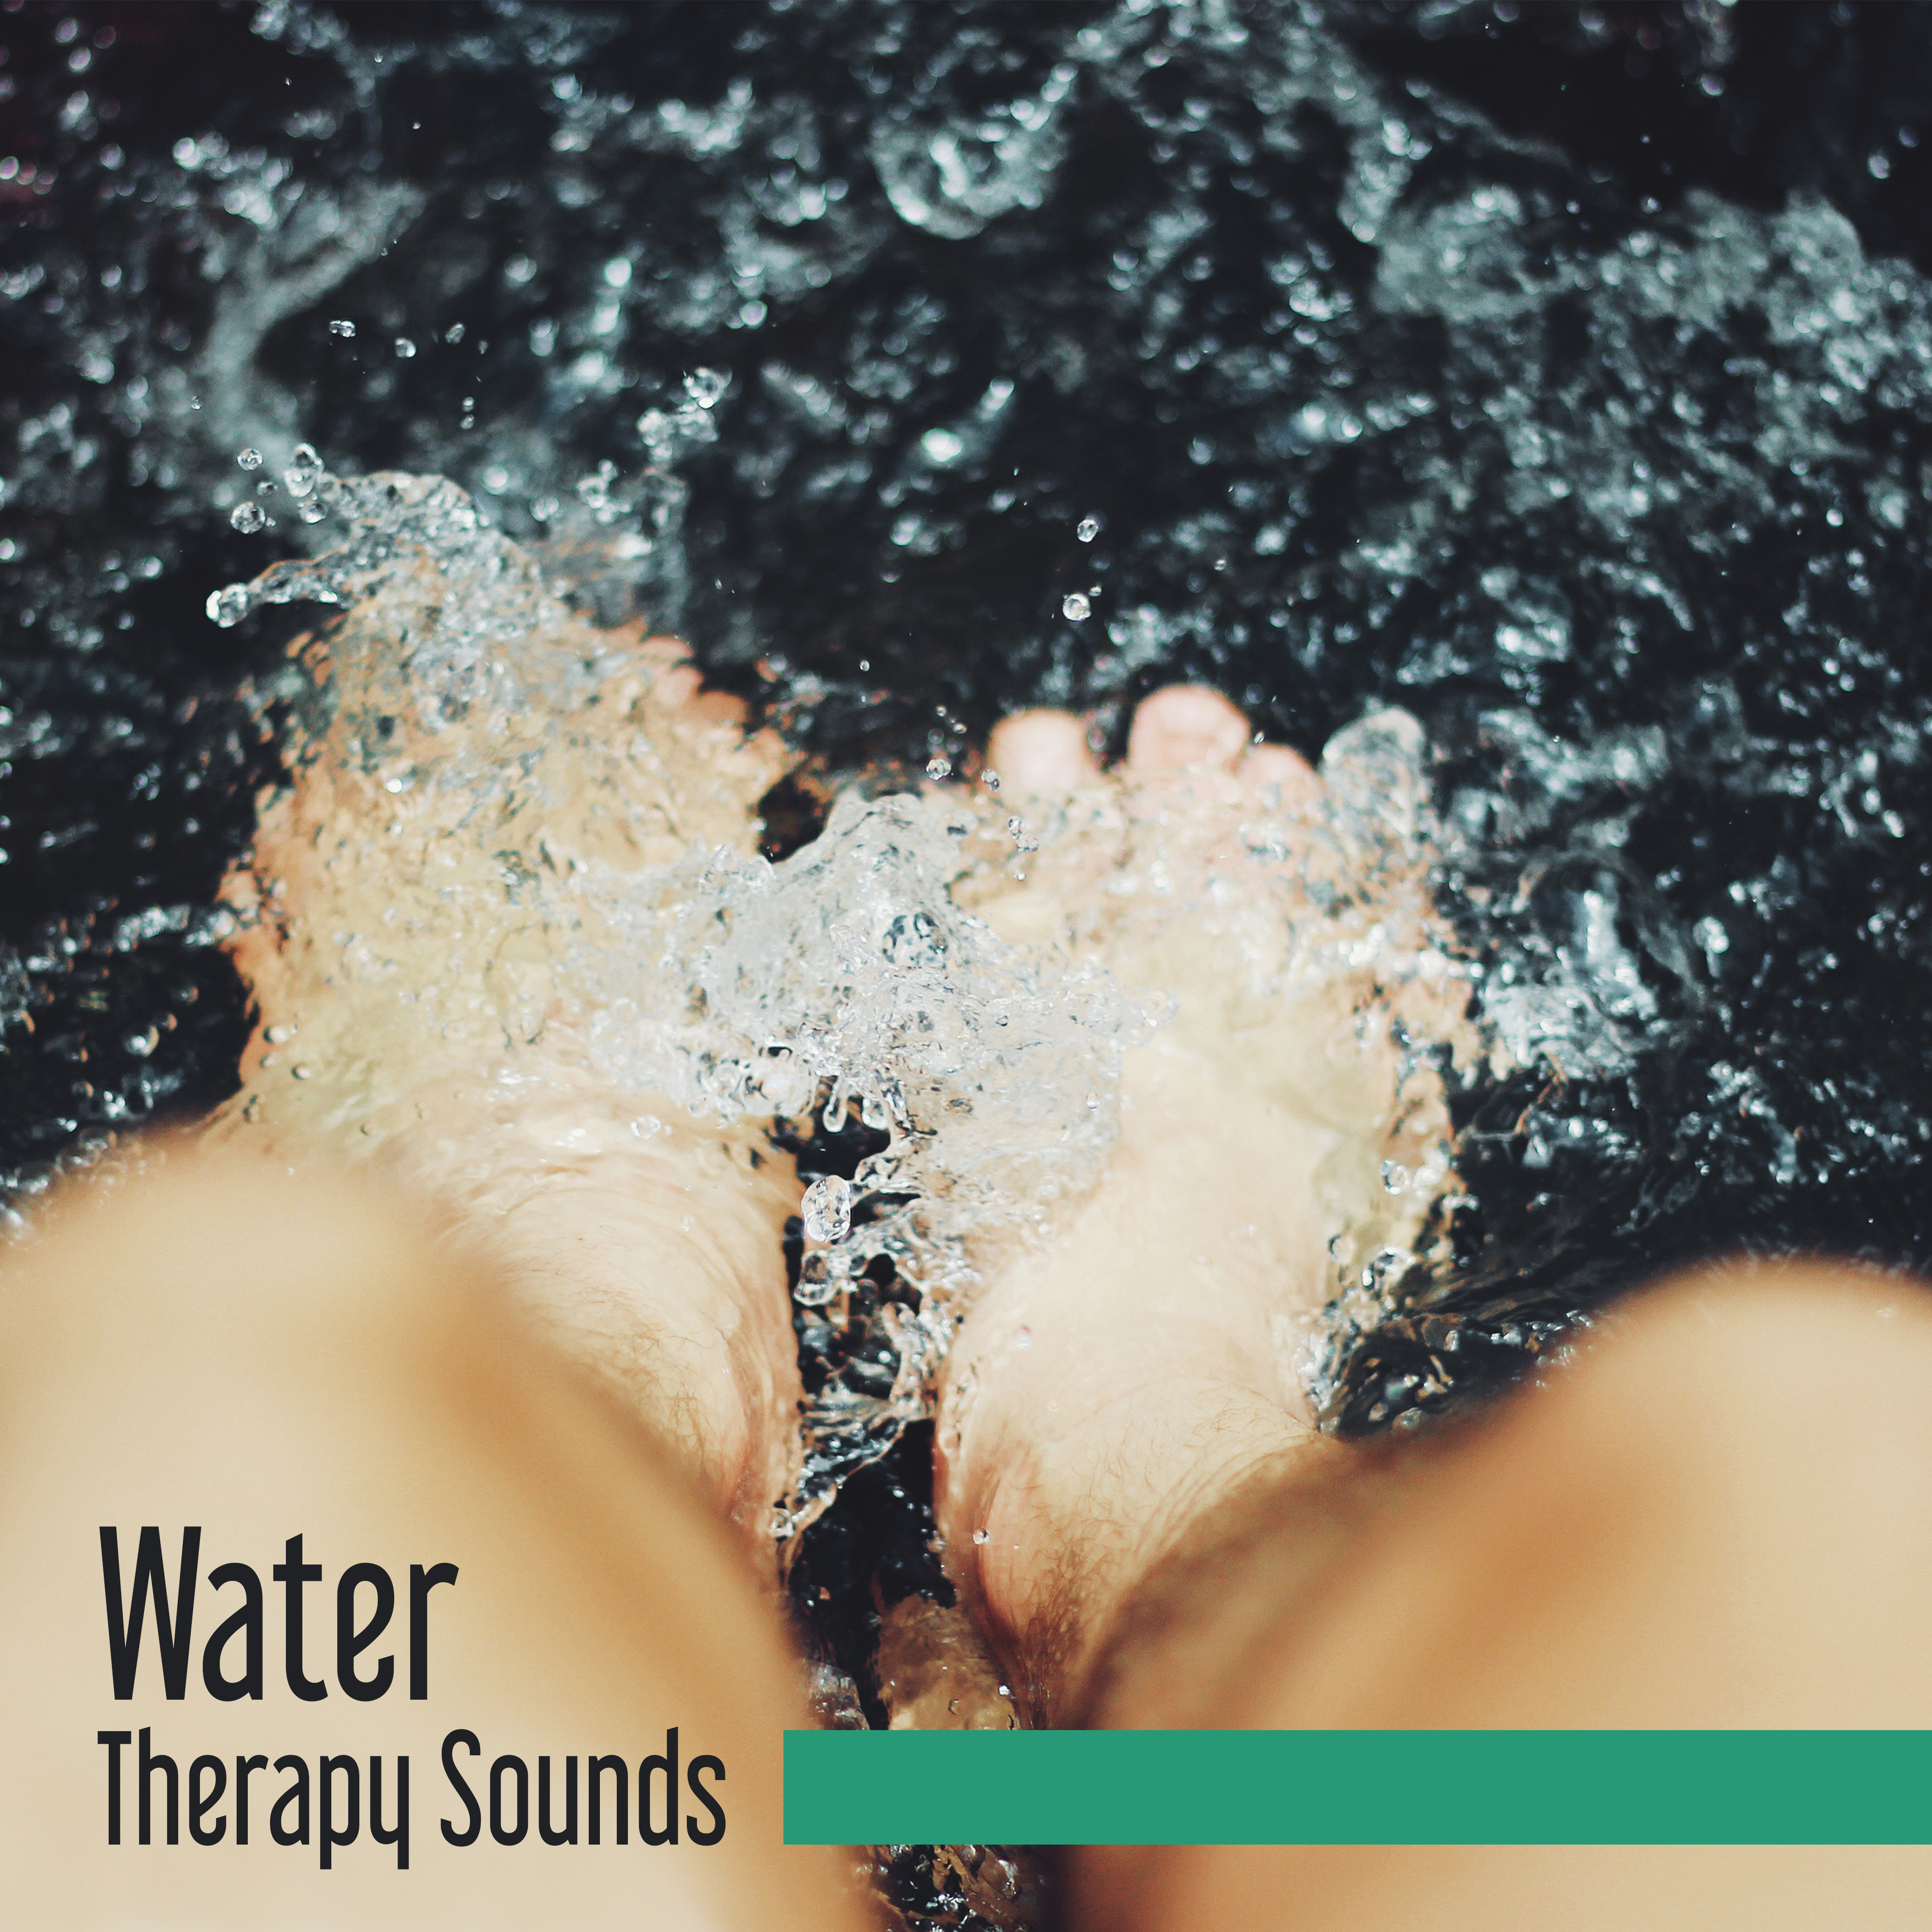 Water Therapy Sounds – Sounds to Calm Down, Nature Healing, Inner Journey, Silent Music